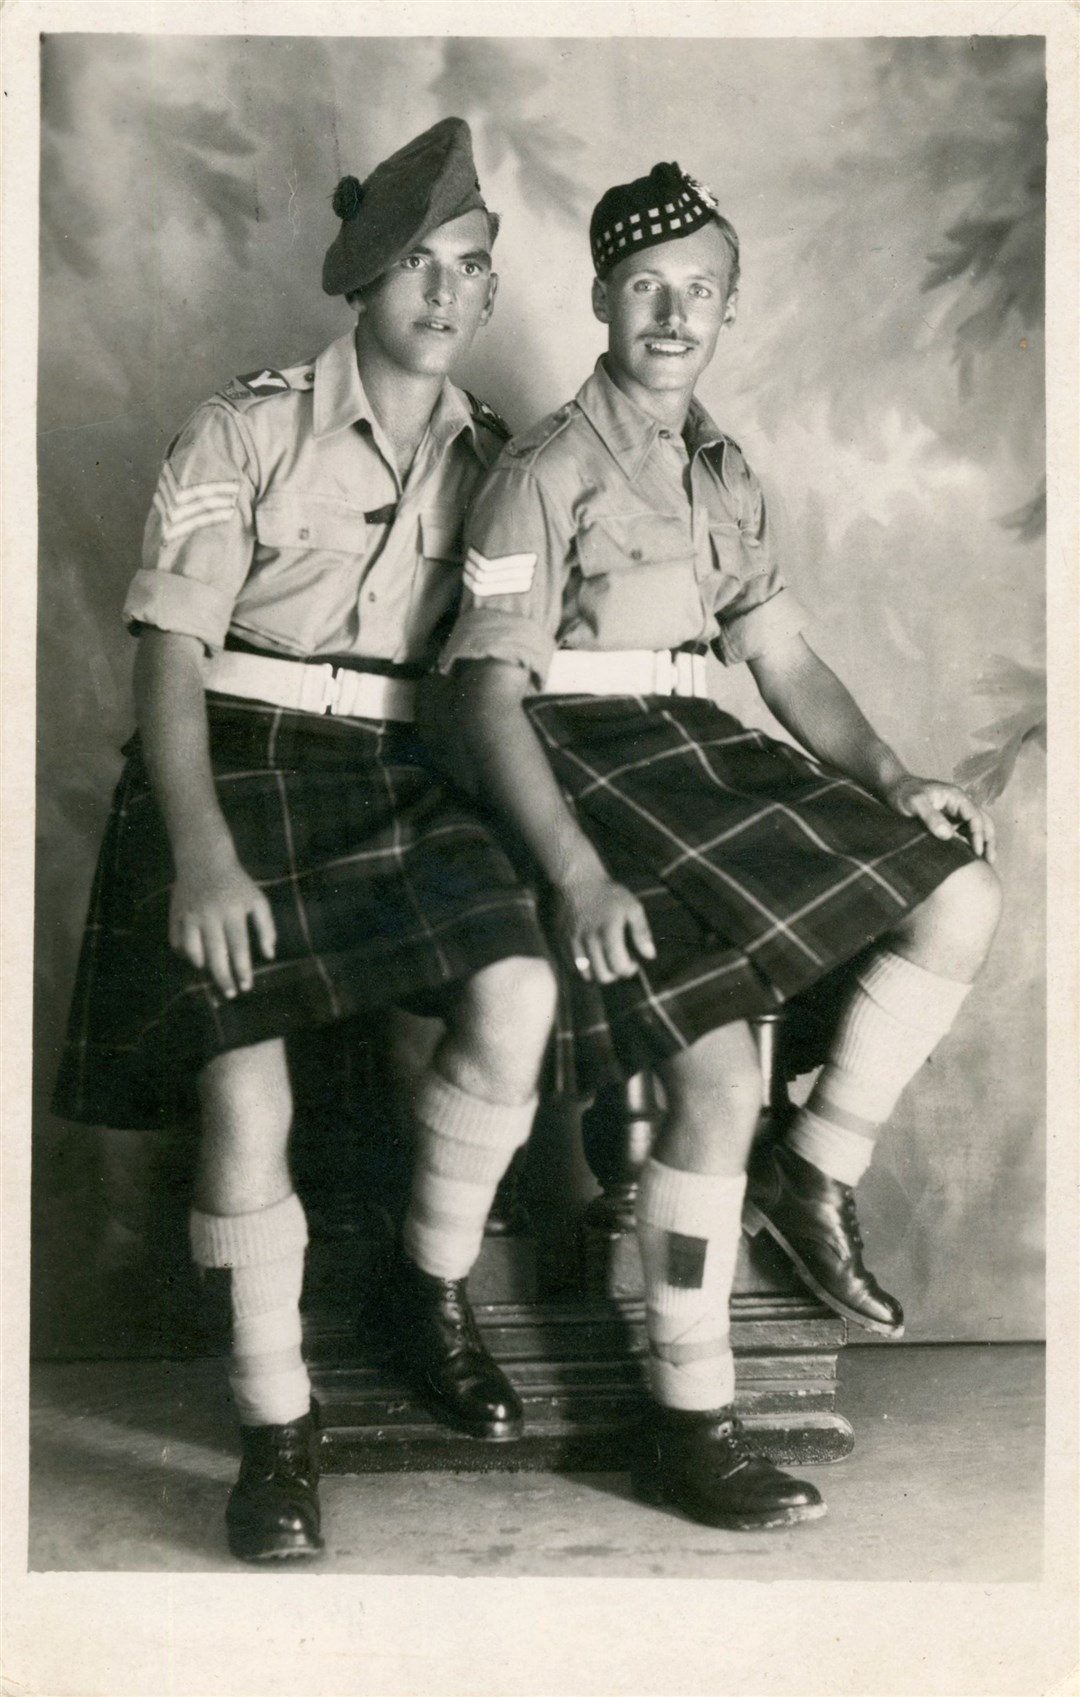 On the left is Jock Young, who lived in the Seafield Primary School area of Elgin.